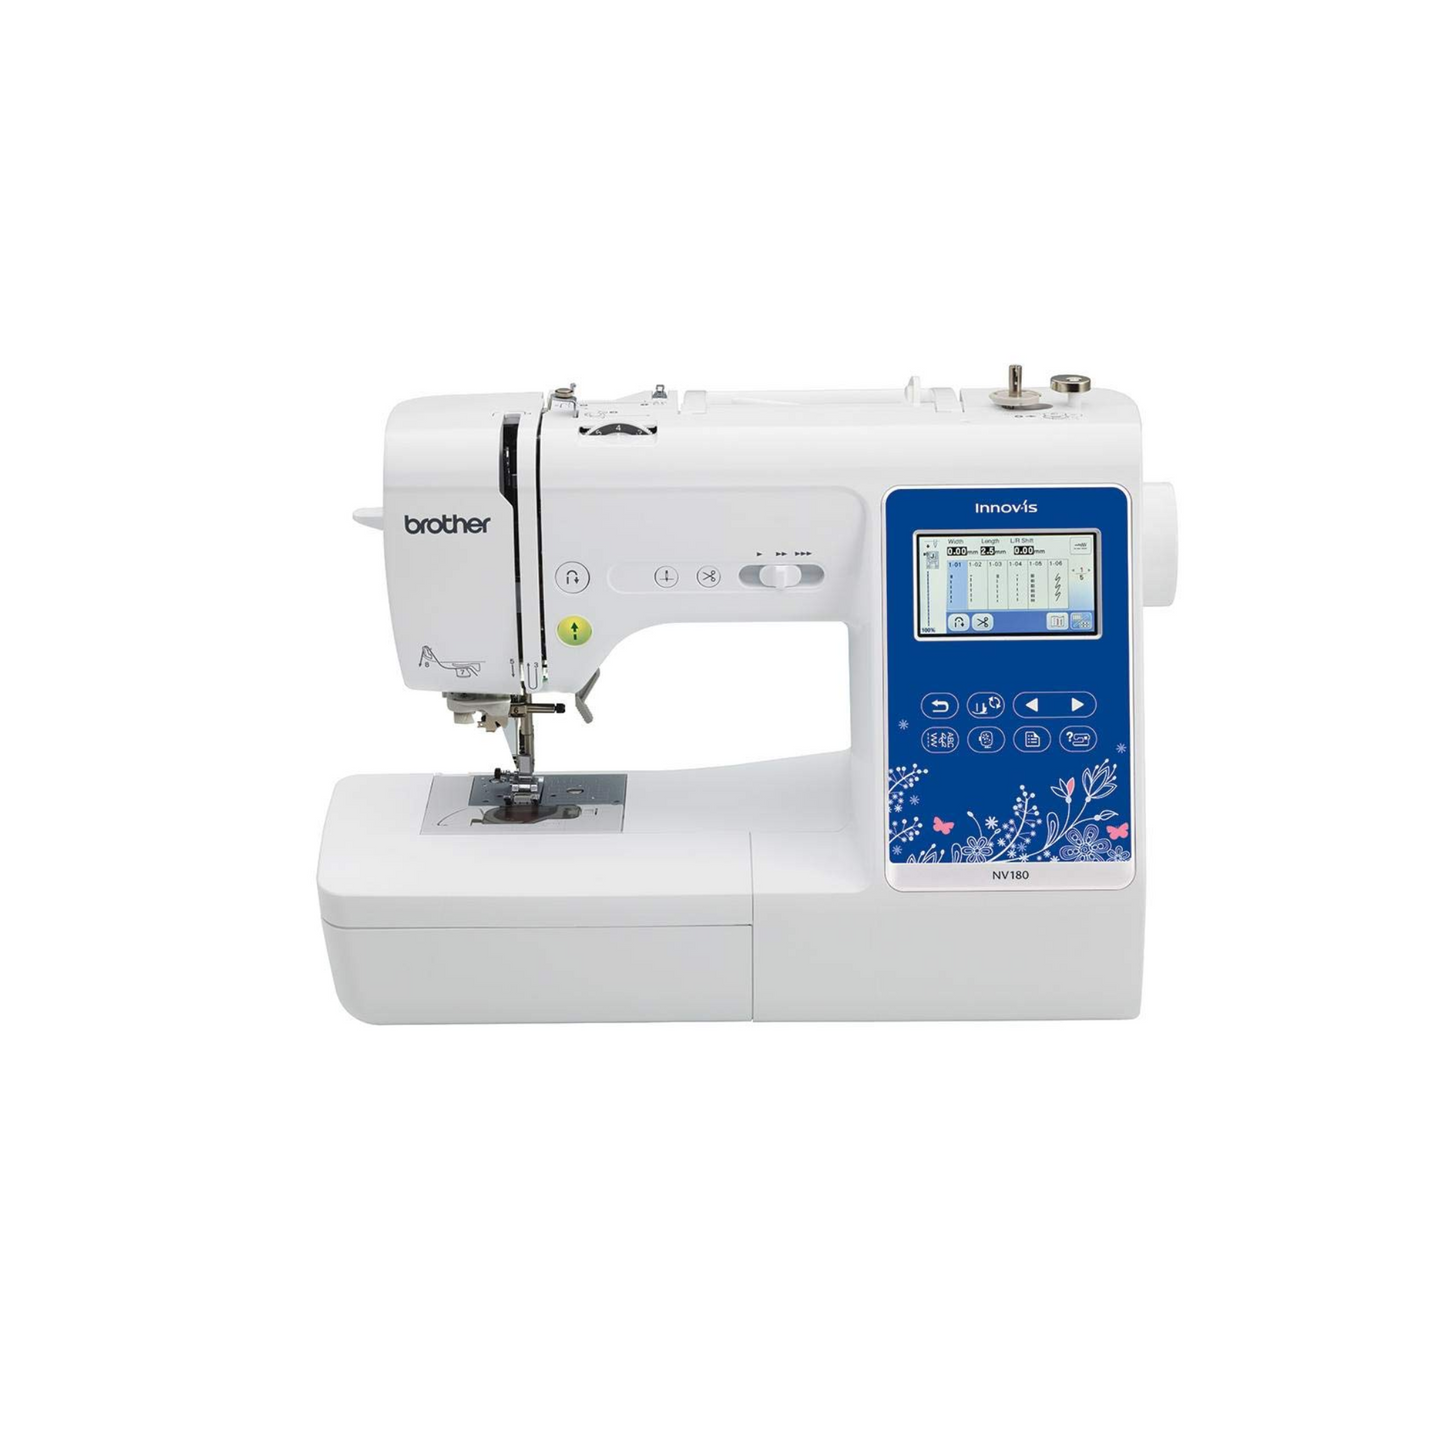 Brother INNOV-IS NV180 - Sewing embroidery machine - White - Close  view